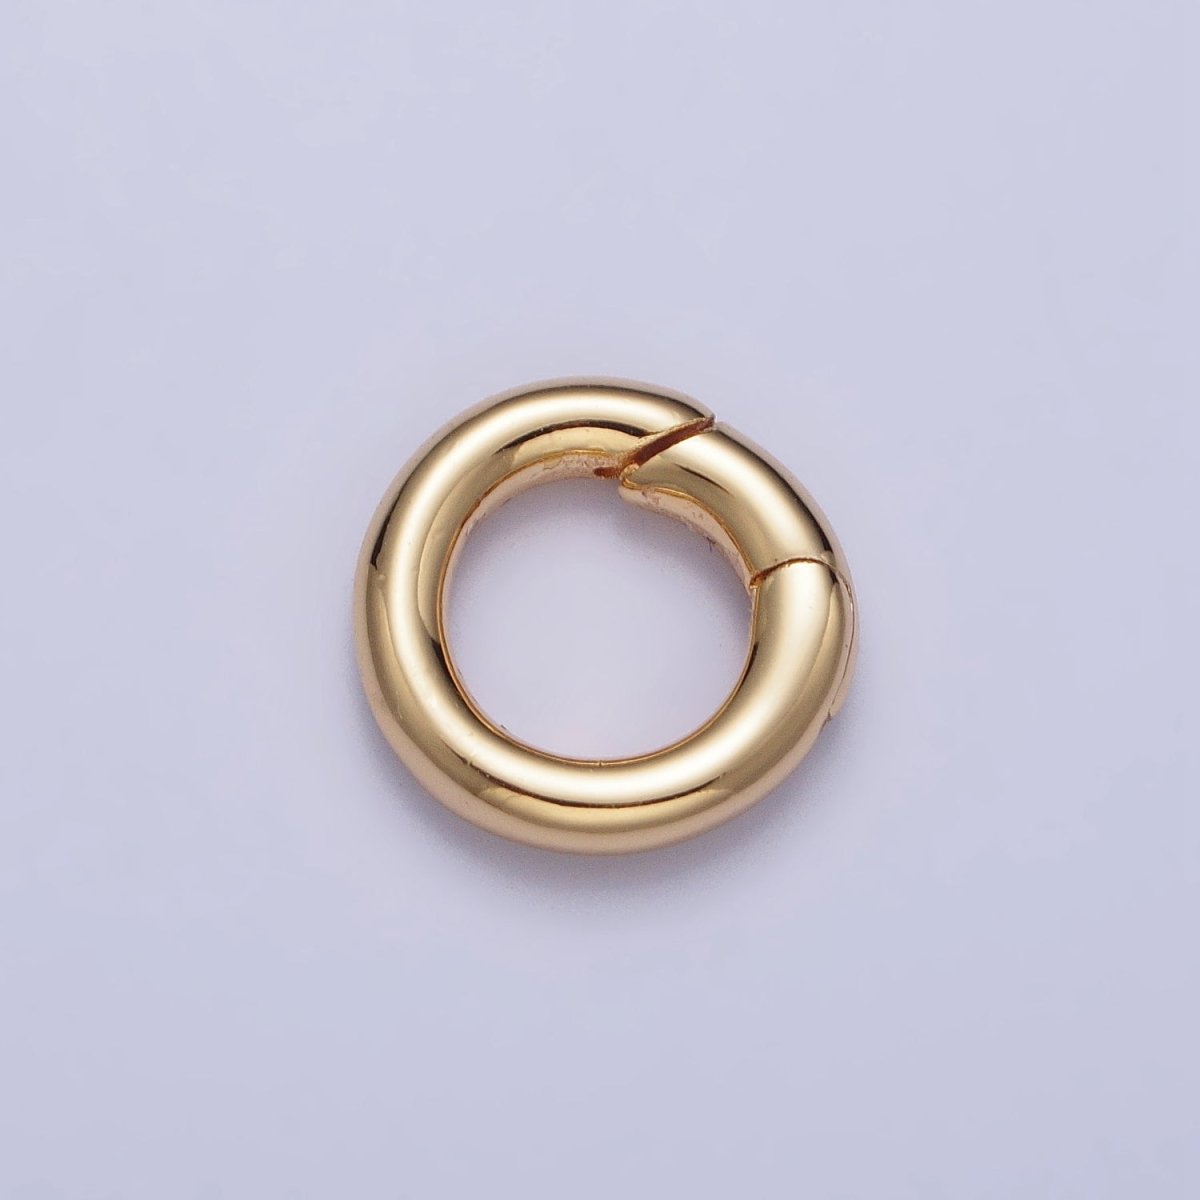 13mm Gold Rounded Push Spring Gate Ring Jewelry Making Closure Enhancer Supply | Z-105 - DLUXCA